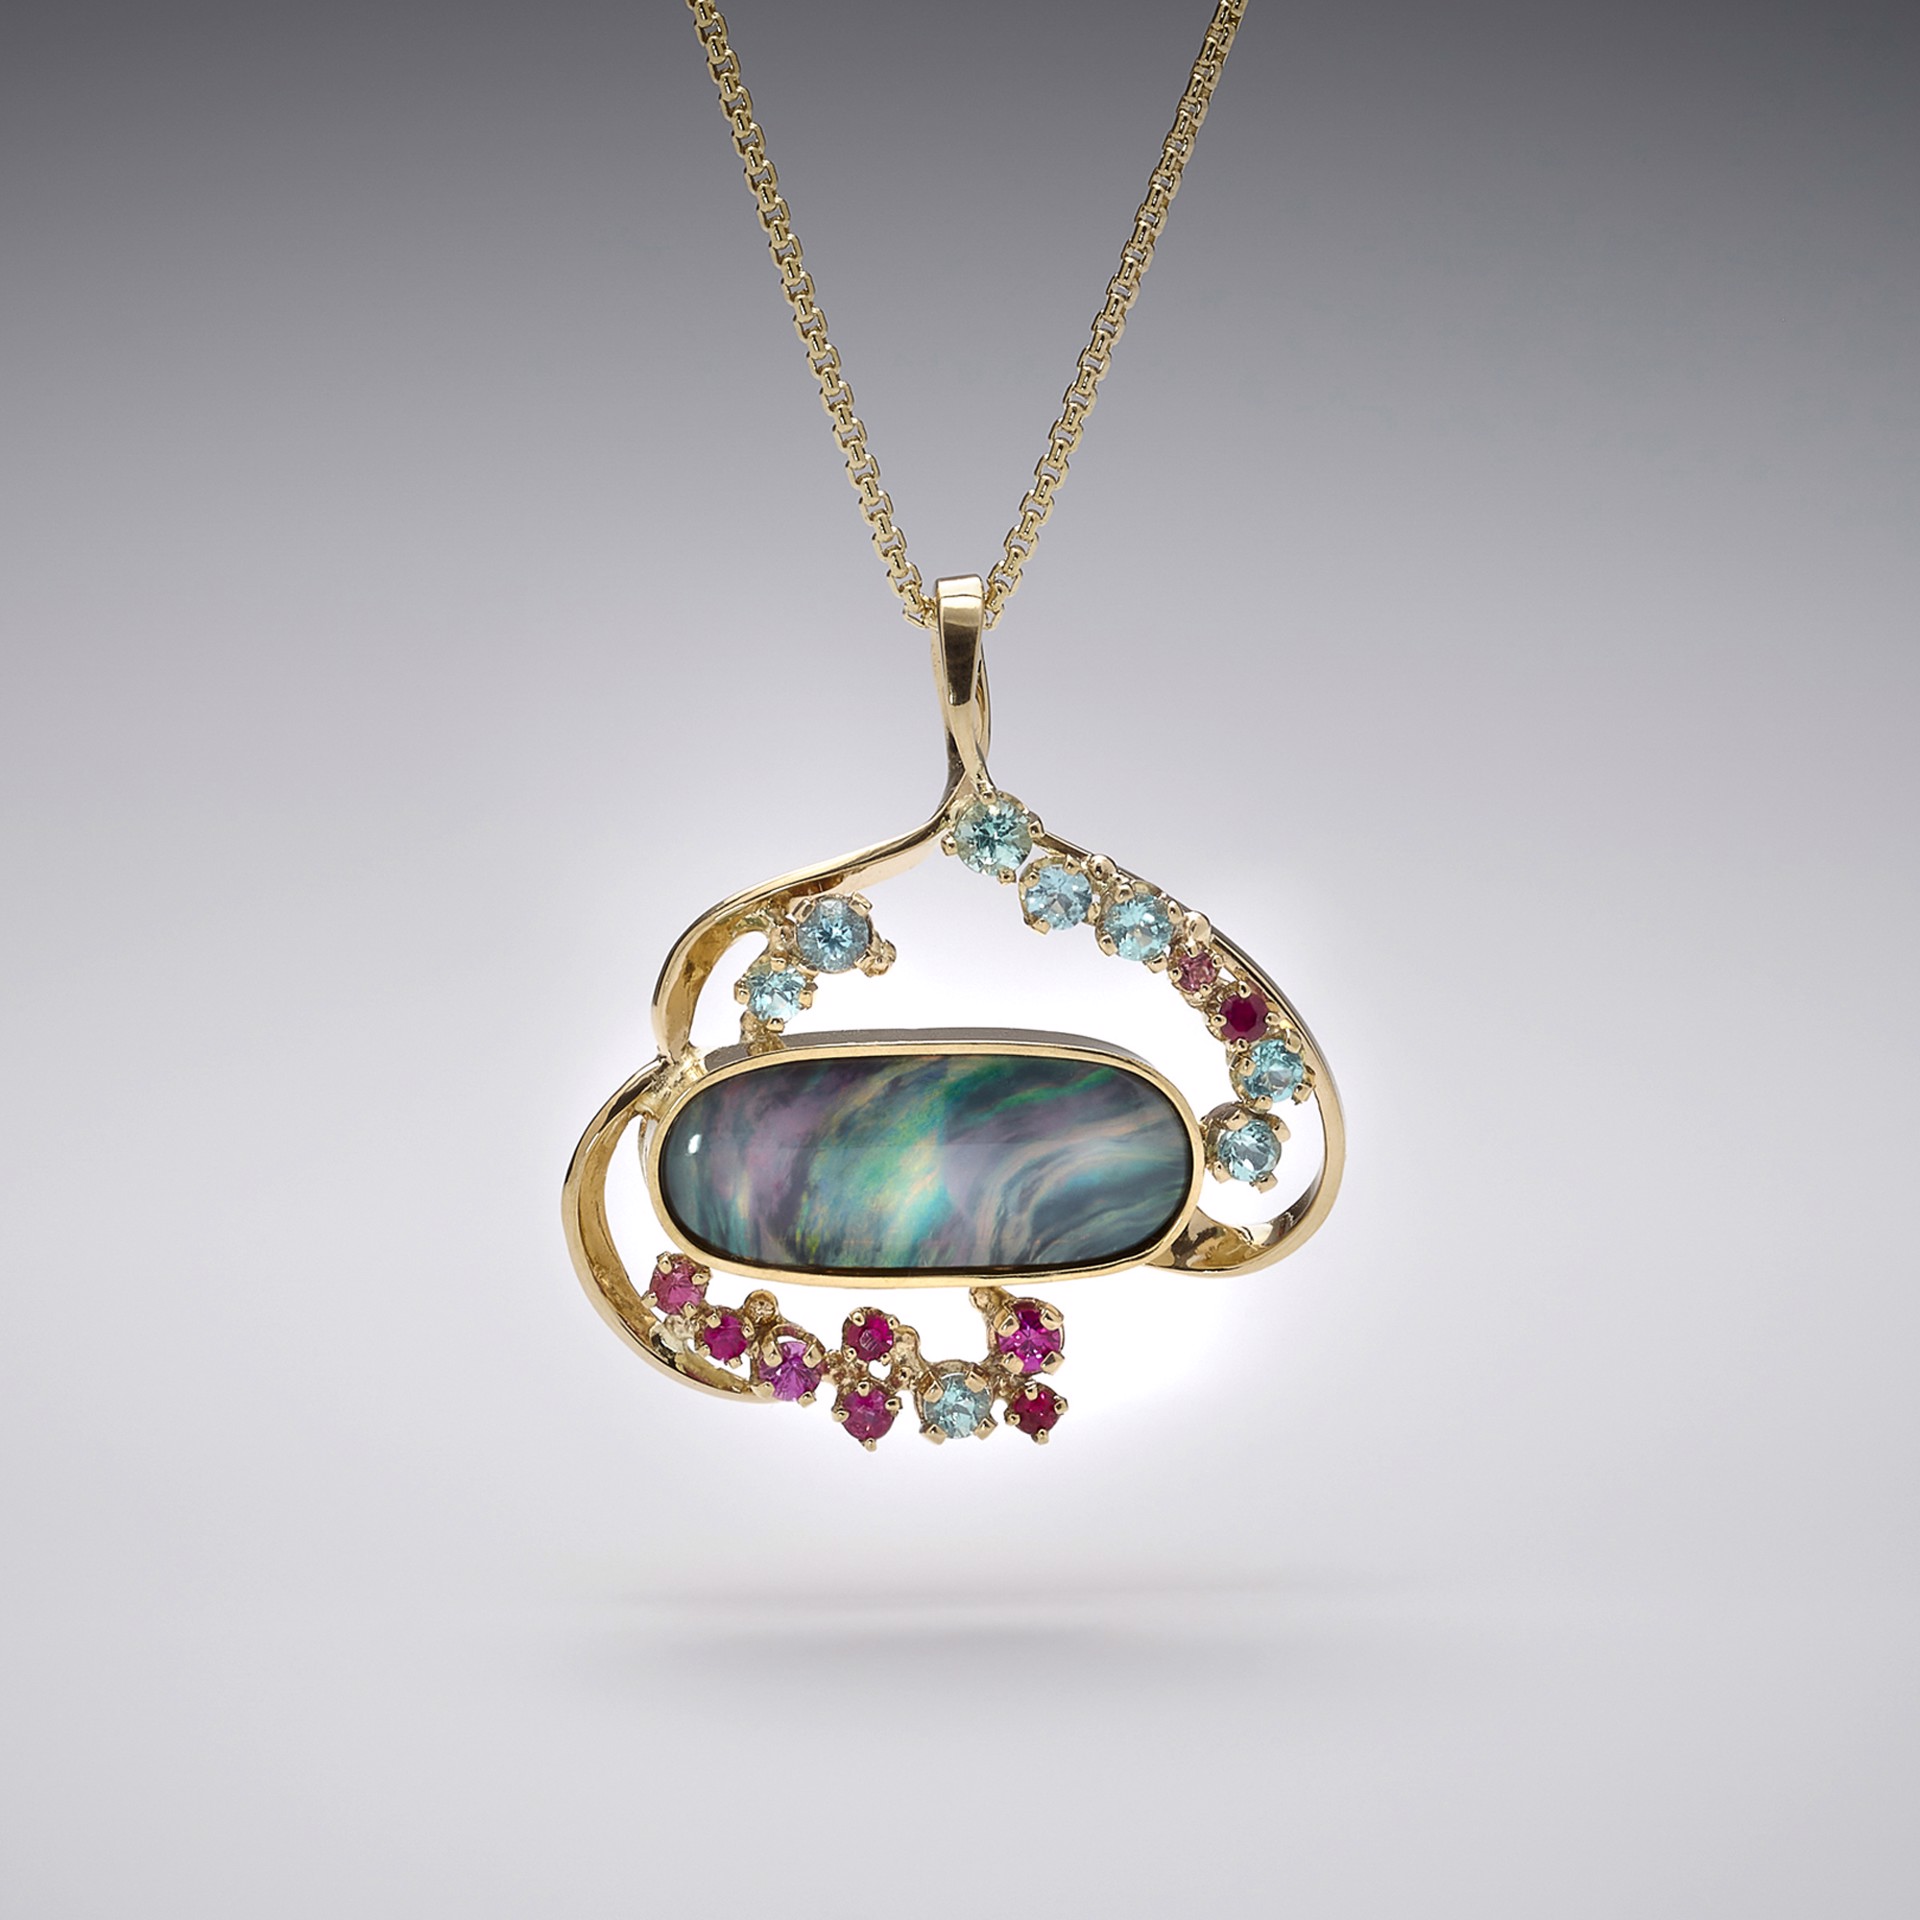 Northern Lights Pendant with Opal, Sapphires, Beryl by Thomas Tietze